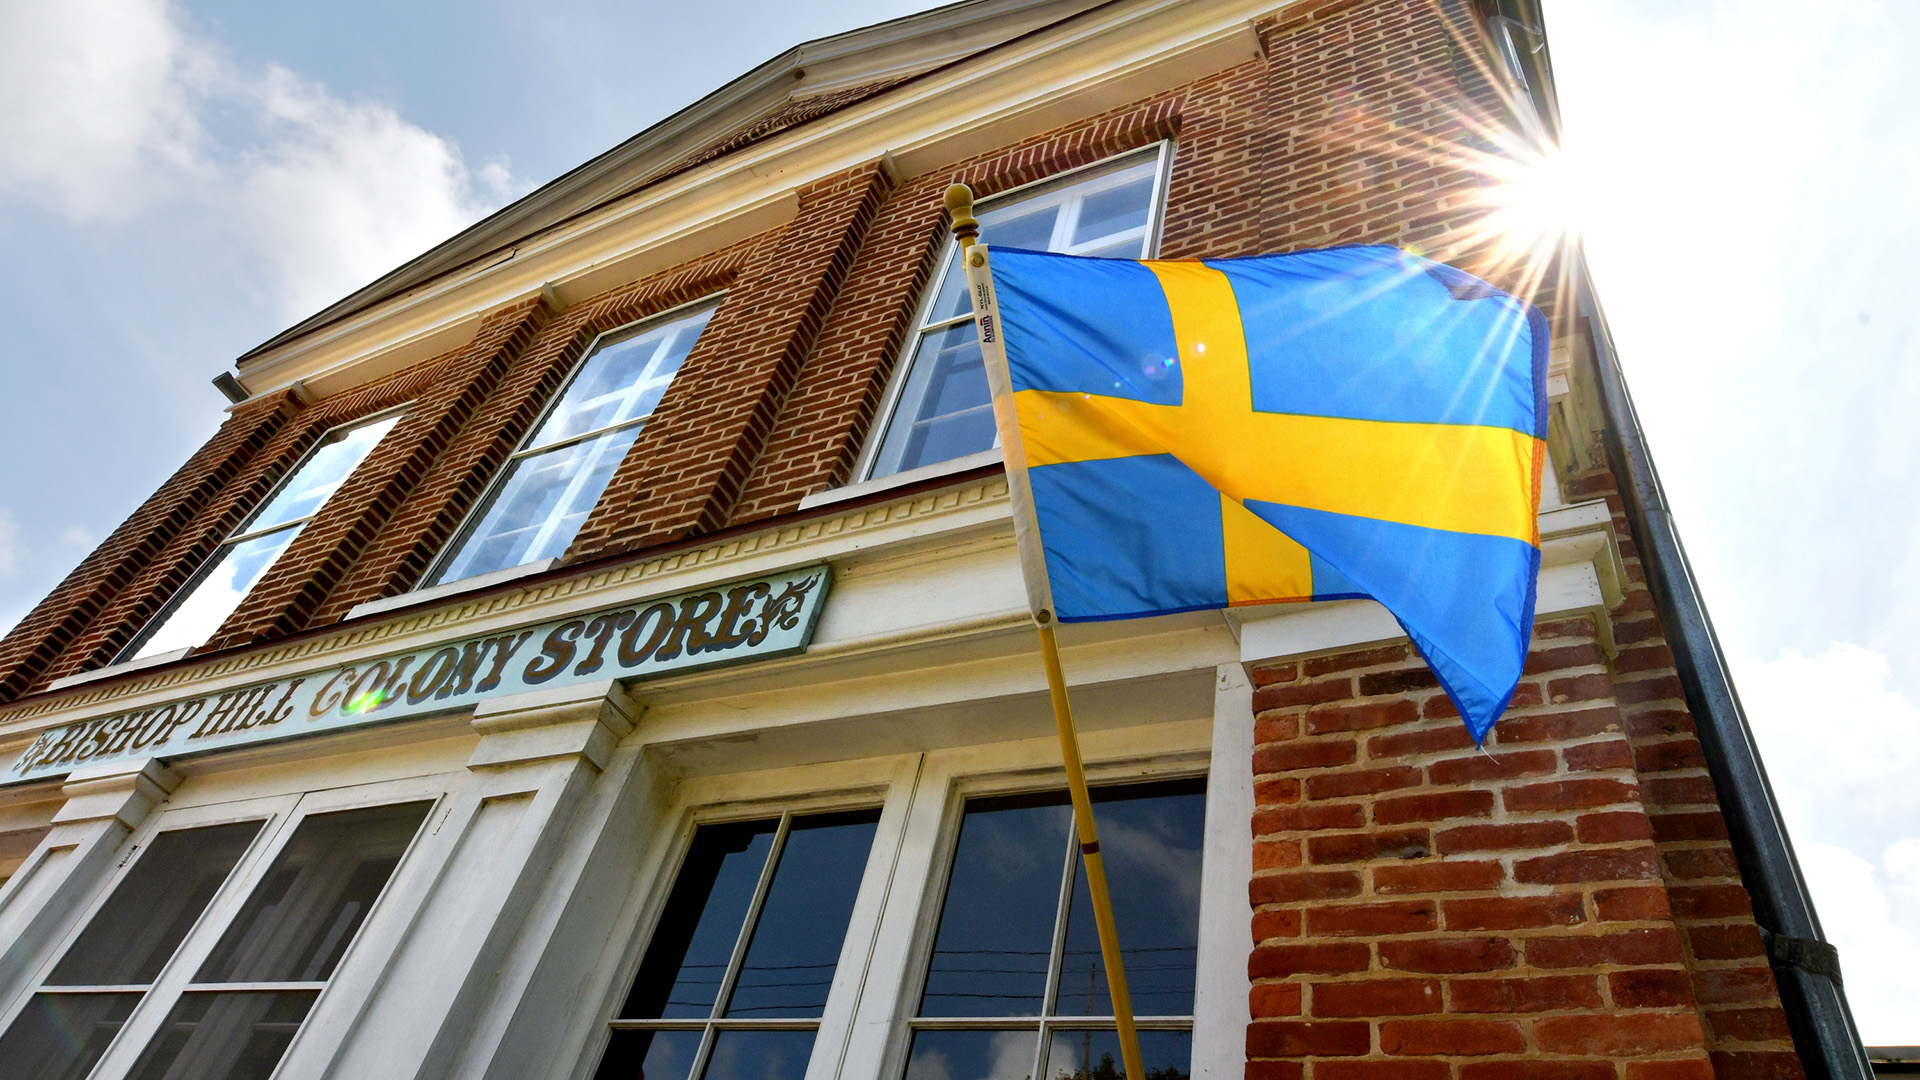 The Bishop Hill Colony Store flies the flag of Sweden